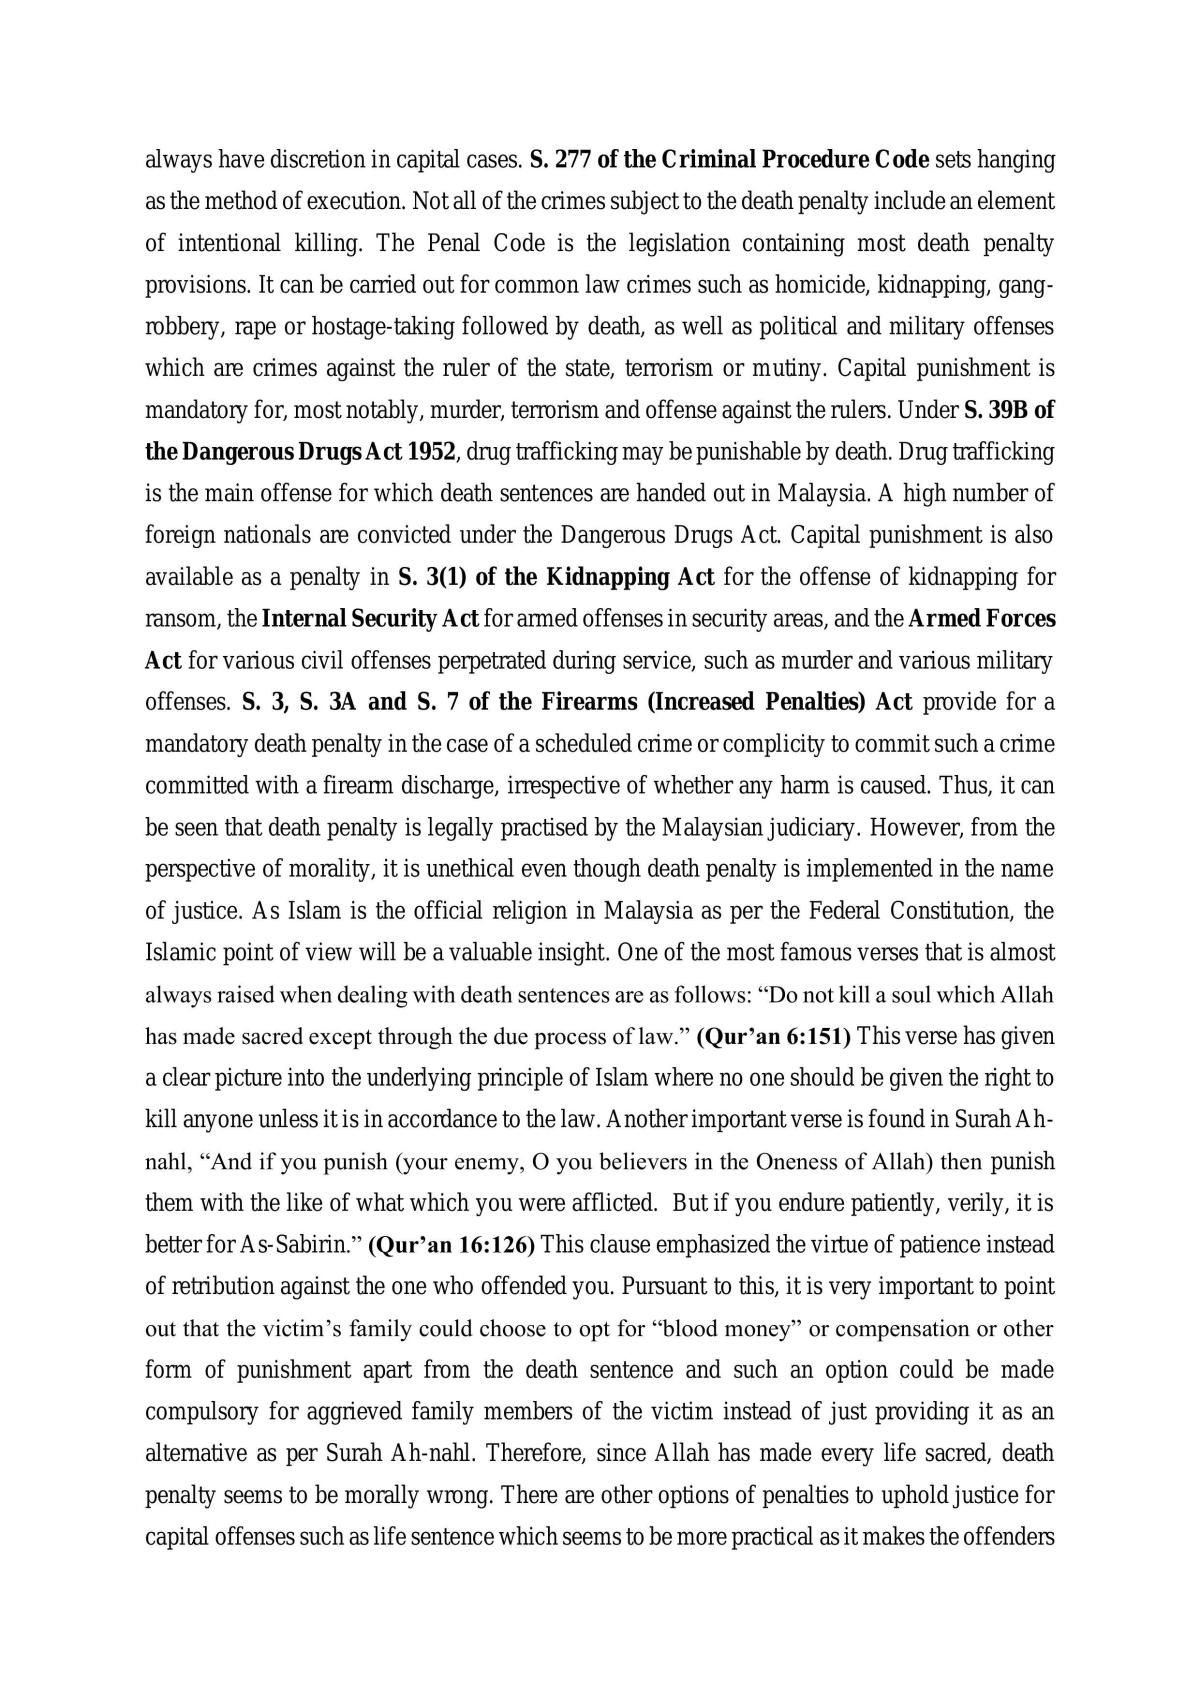 Relationship between Law and Morality - Page 2